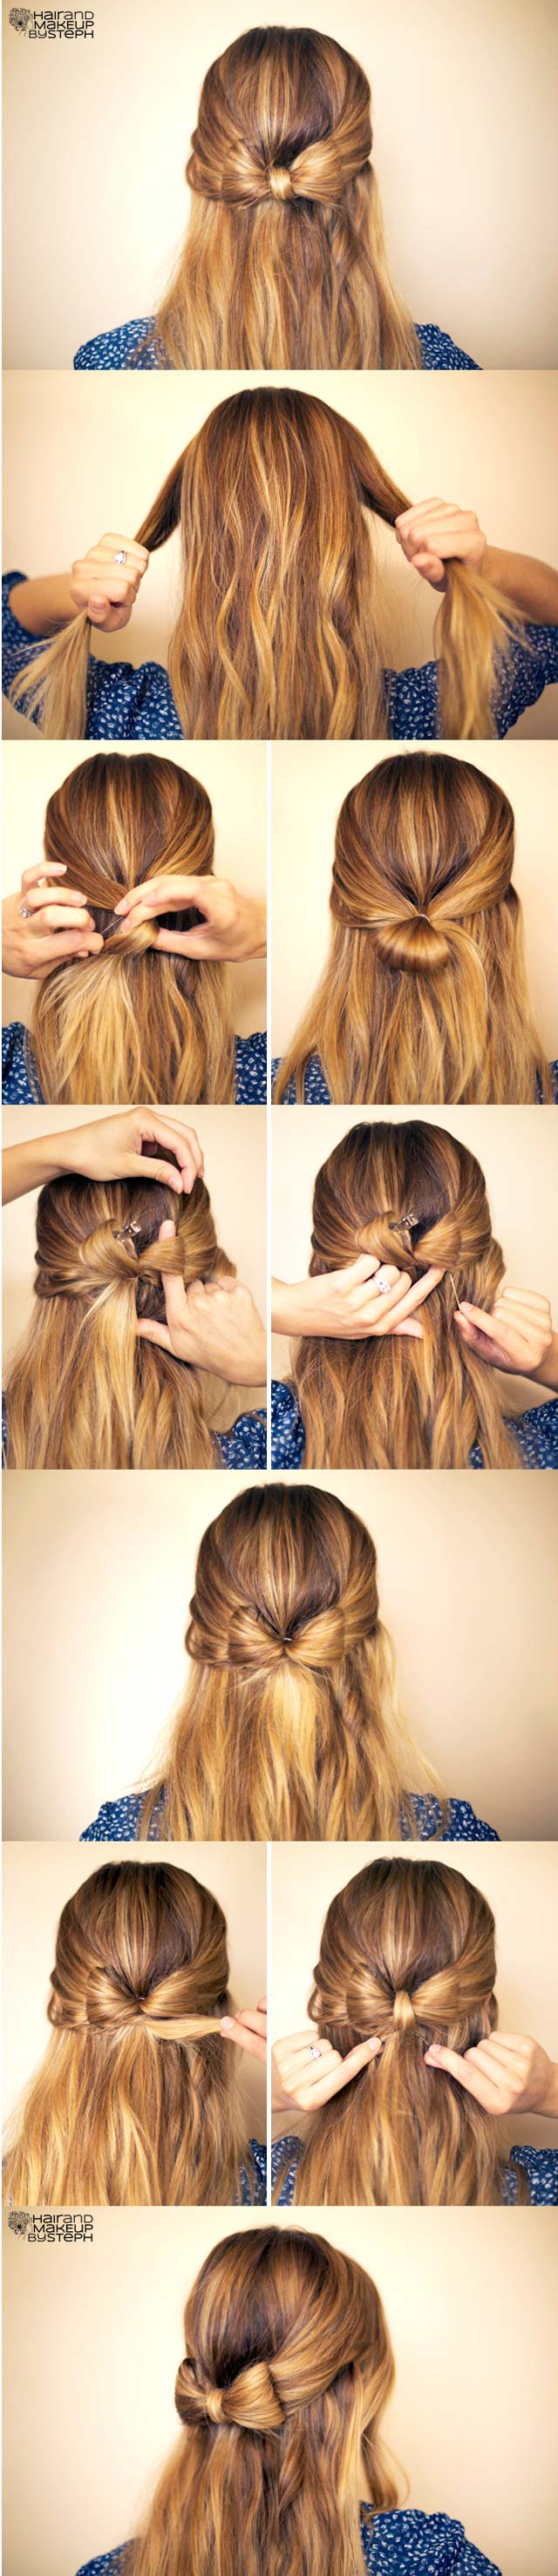 DIY! Your Step-by-Step for the Best Cute Hairstyles - Fashion Diva ...